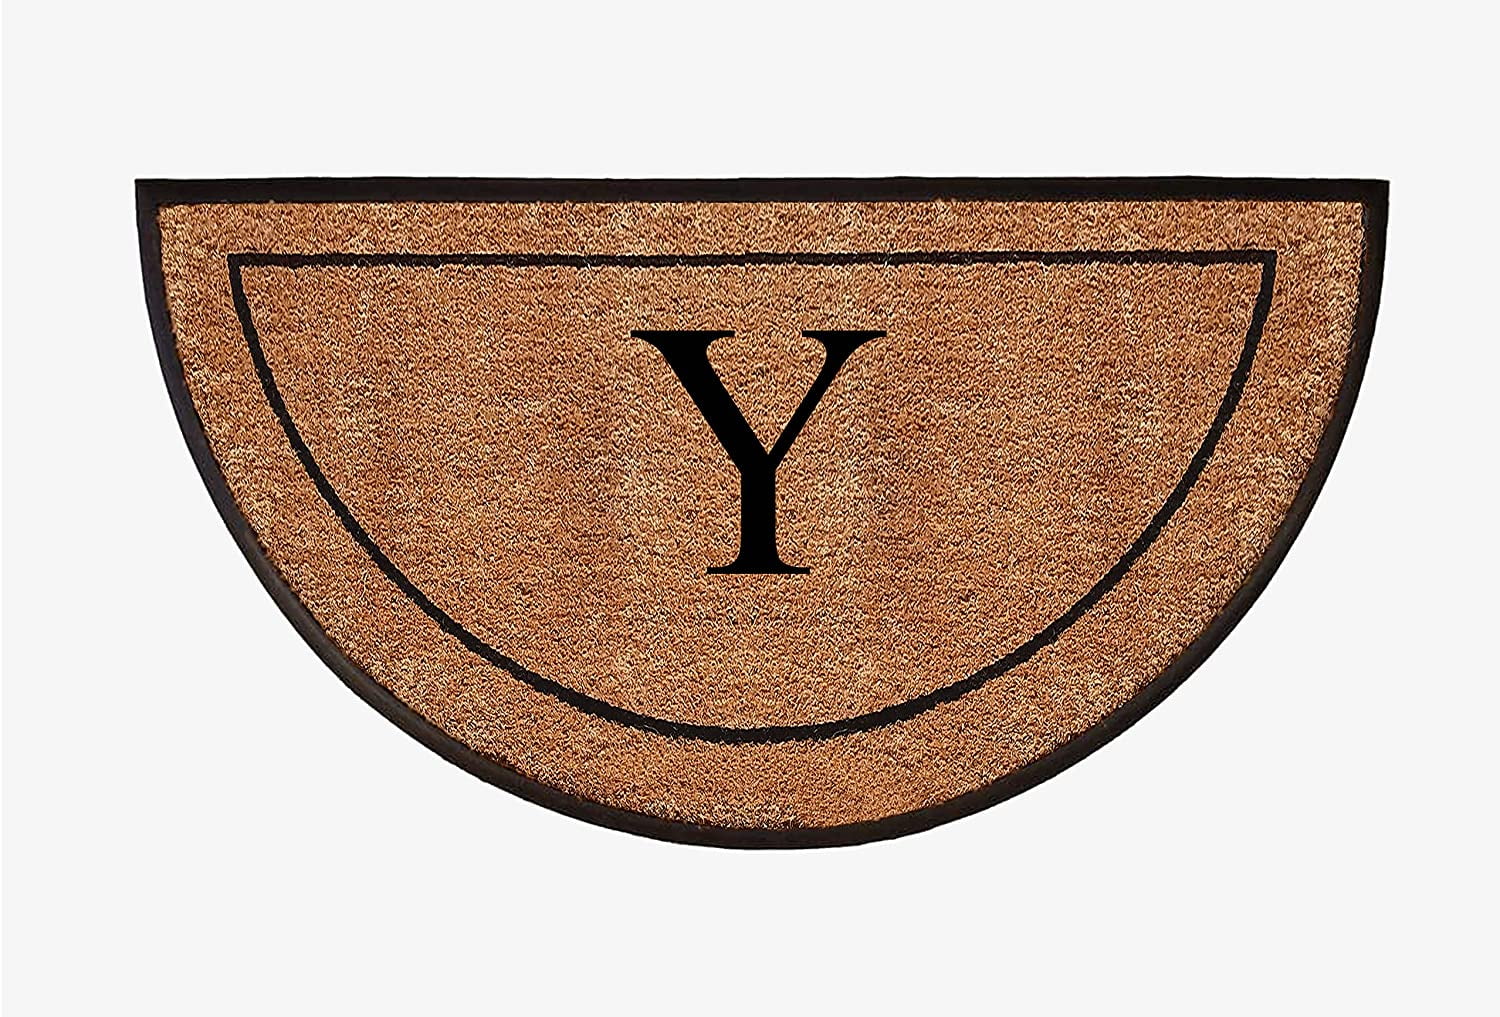 A1hc Natural Rubber & Coir 24x39 Monogrammed Doormat for Front Doormat A1 Home Collections LLC Letter: Y